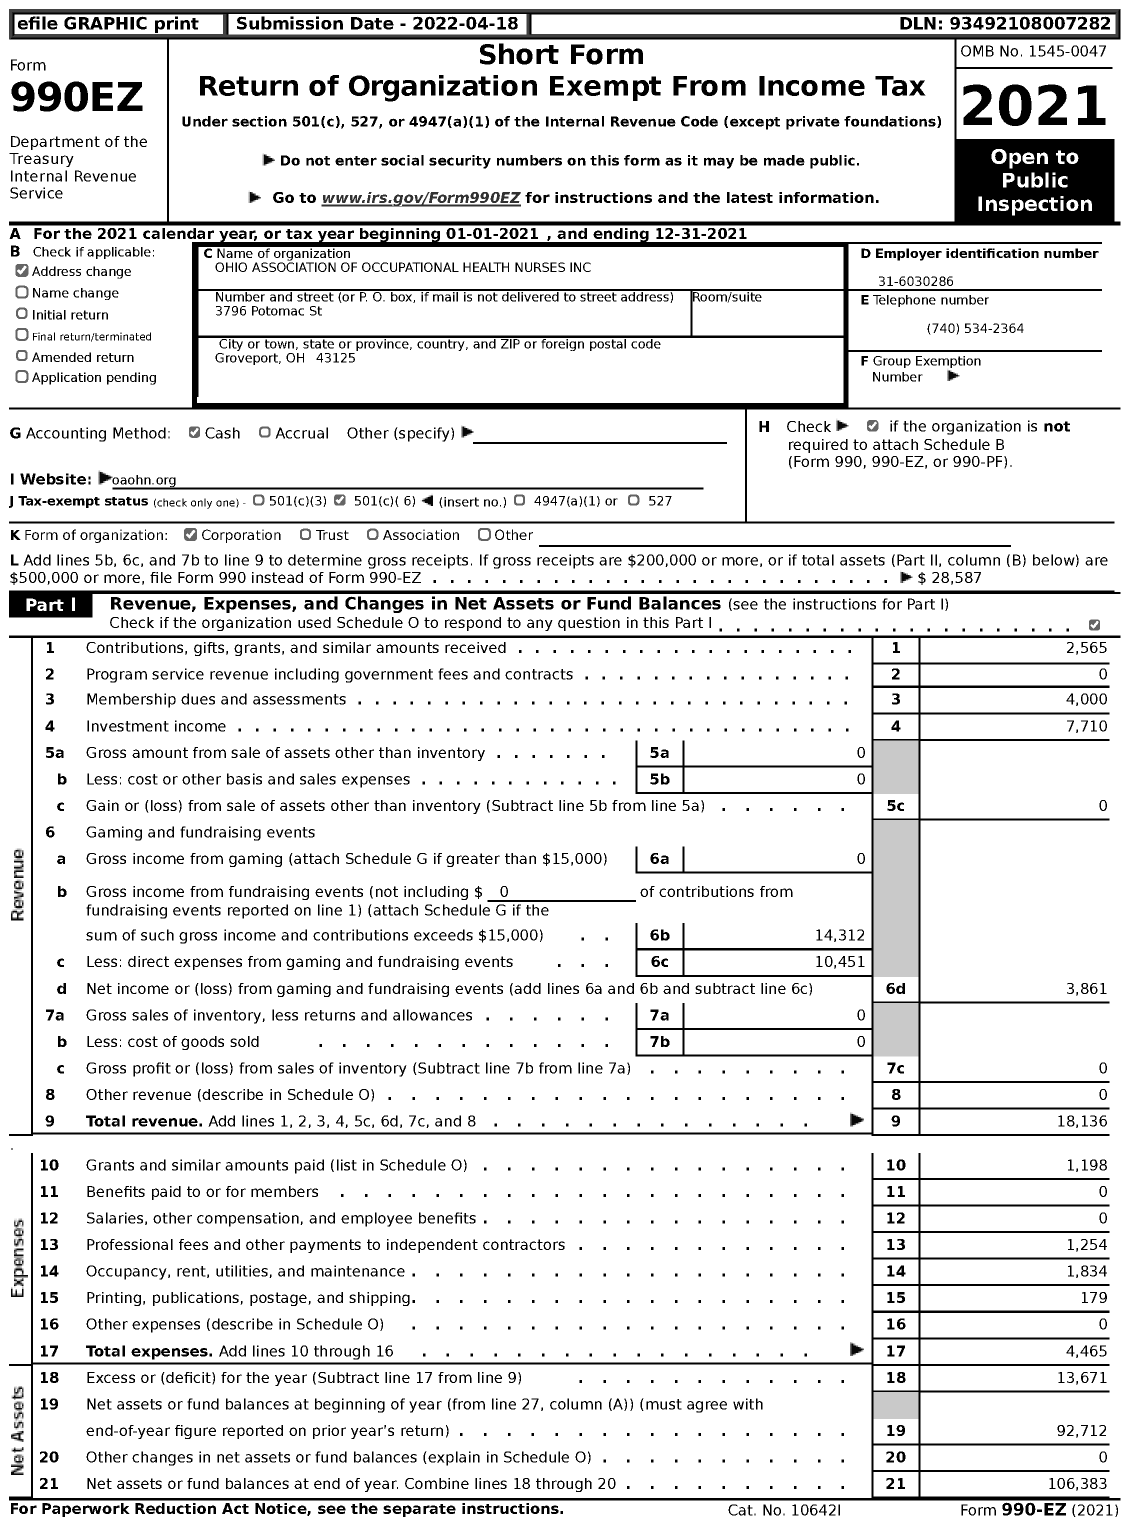 Image of first page of 2021 Form 990EZ for Ohio Association of Occupational Health Nurses